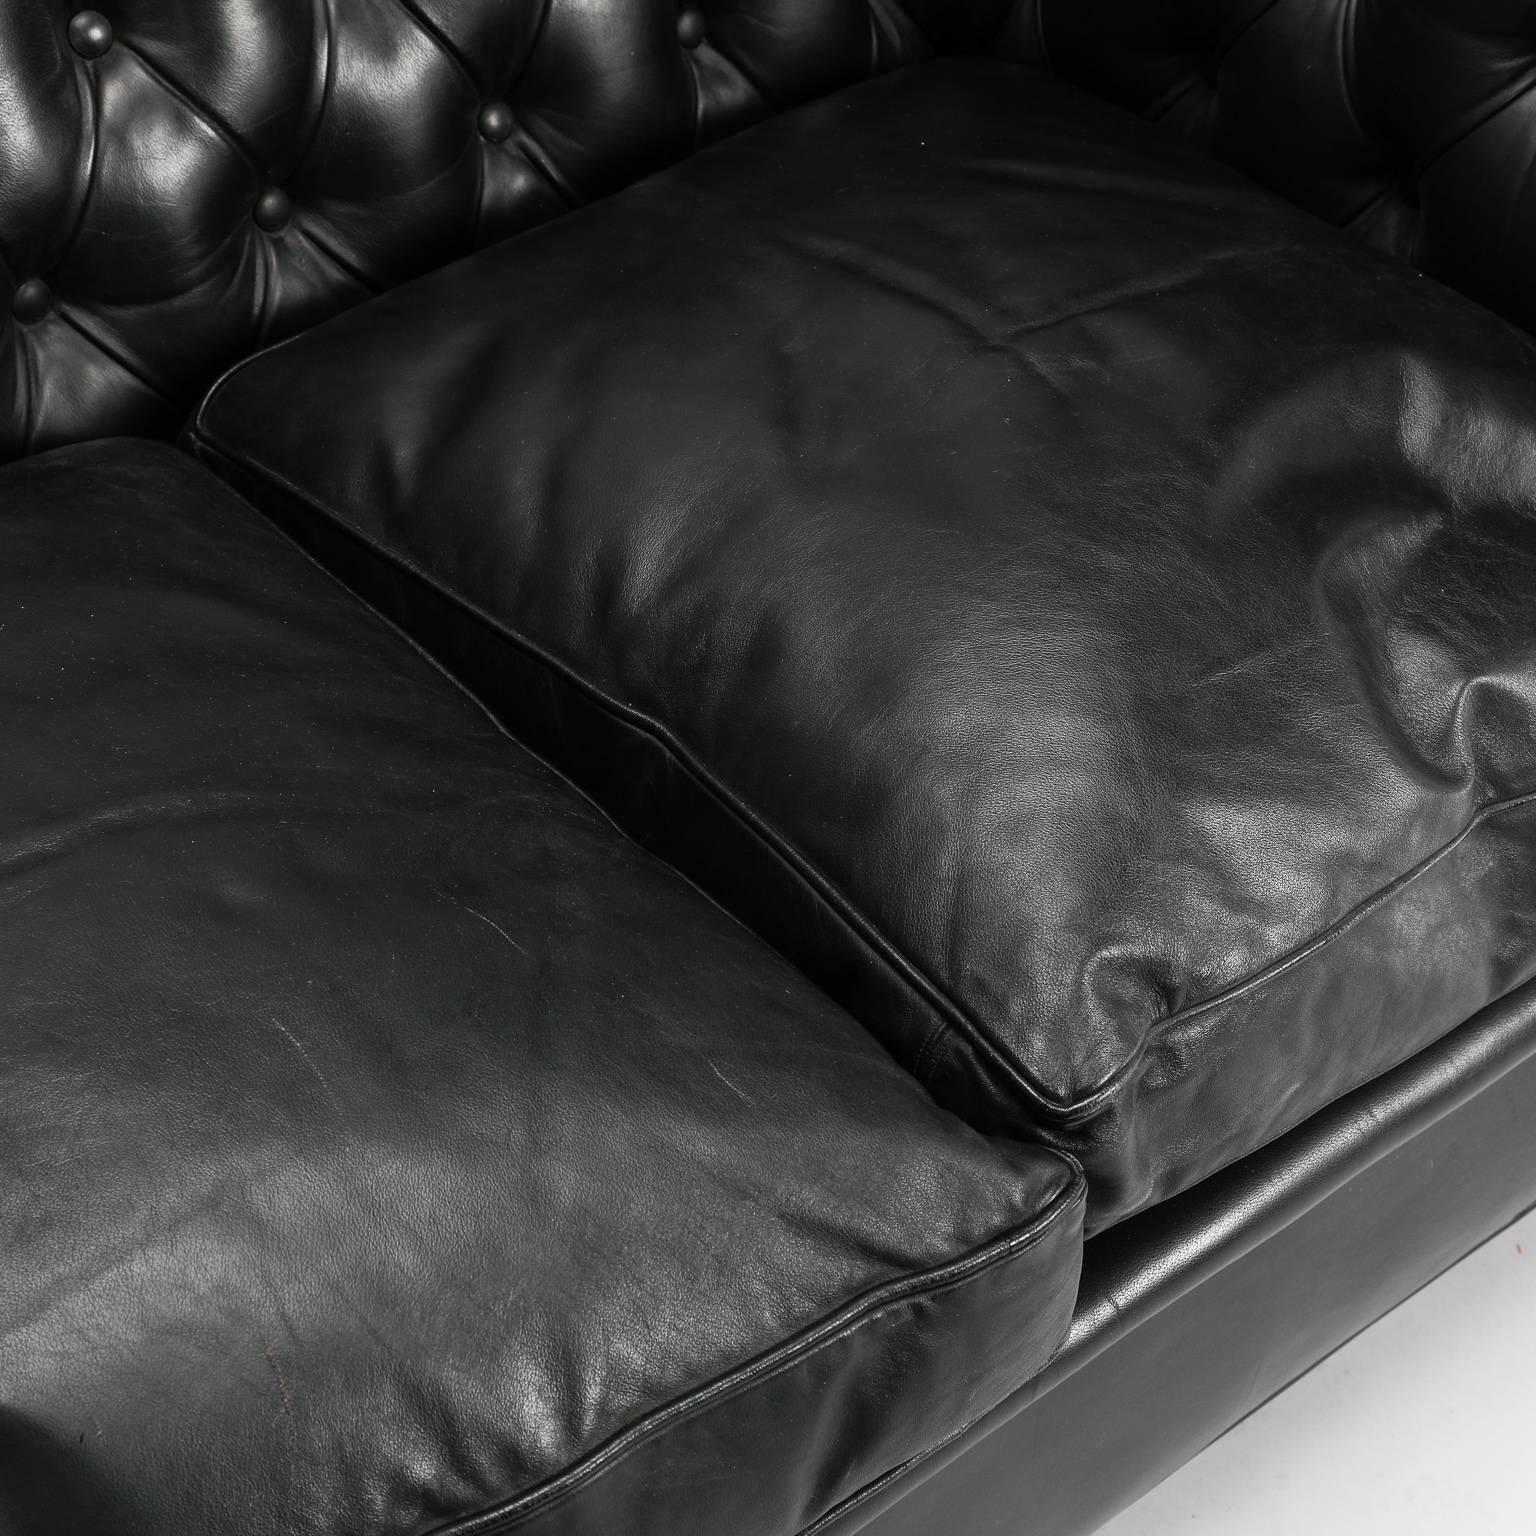 Three-seat black leather Chesterfield sofa found in England, circa 1960s. Rolled arms and backrest are diamond tufted with three separate seat cushions. Turned wood legs. Overall very good vintage condition with some wear to leather. Arms are 27”